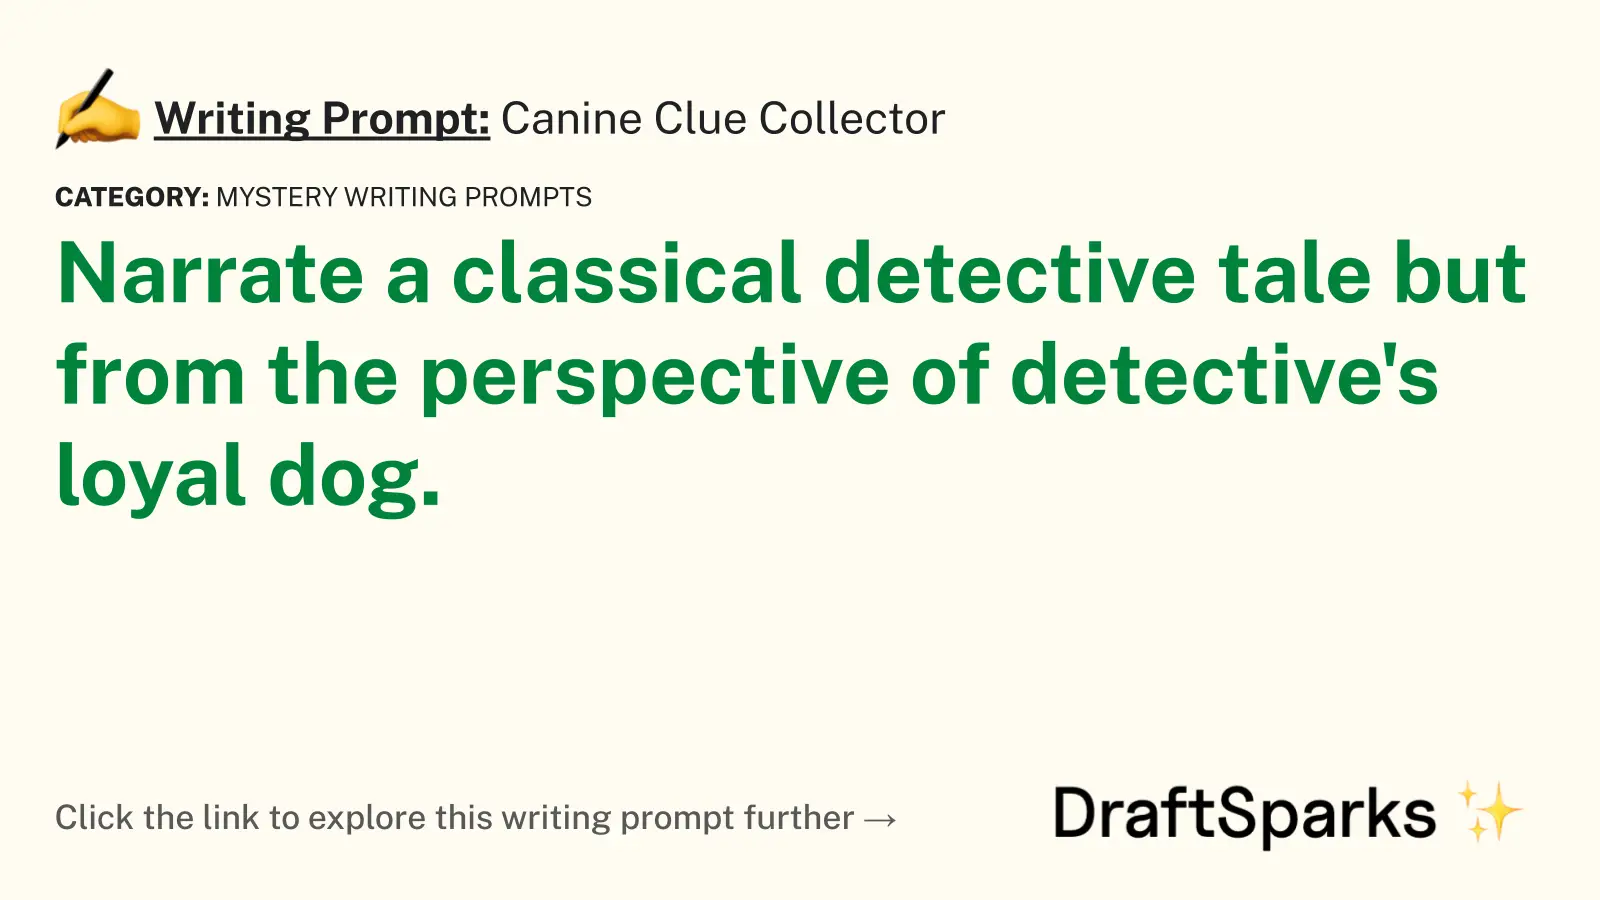 Canine Clue Collector